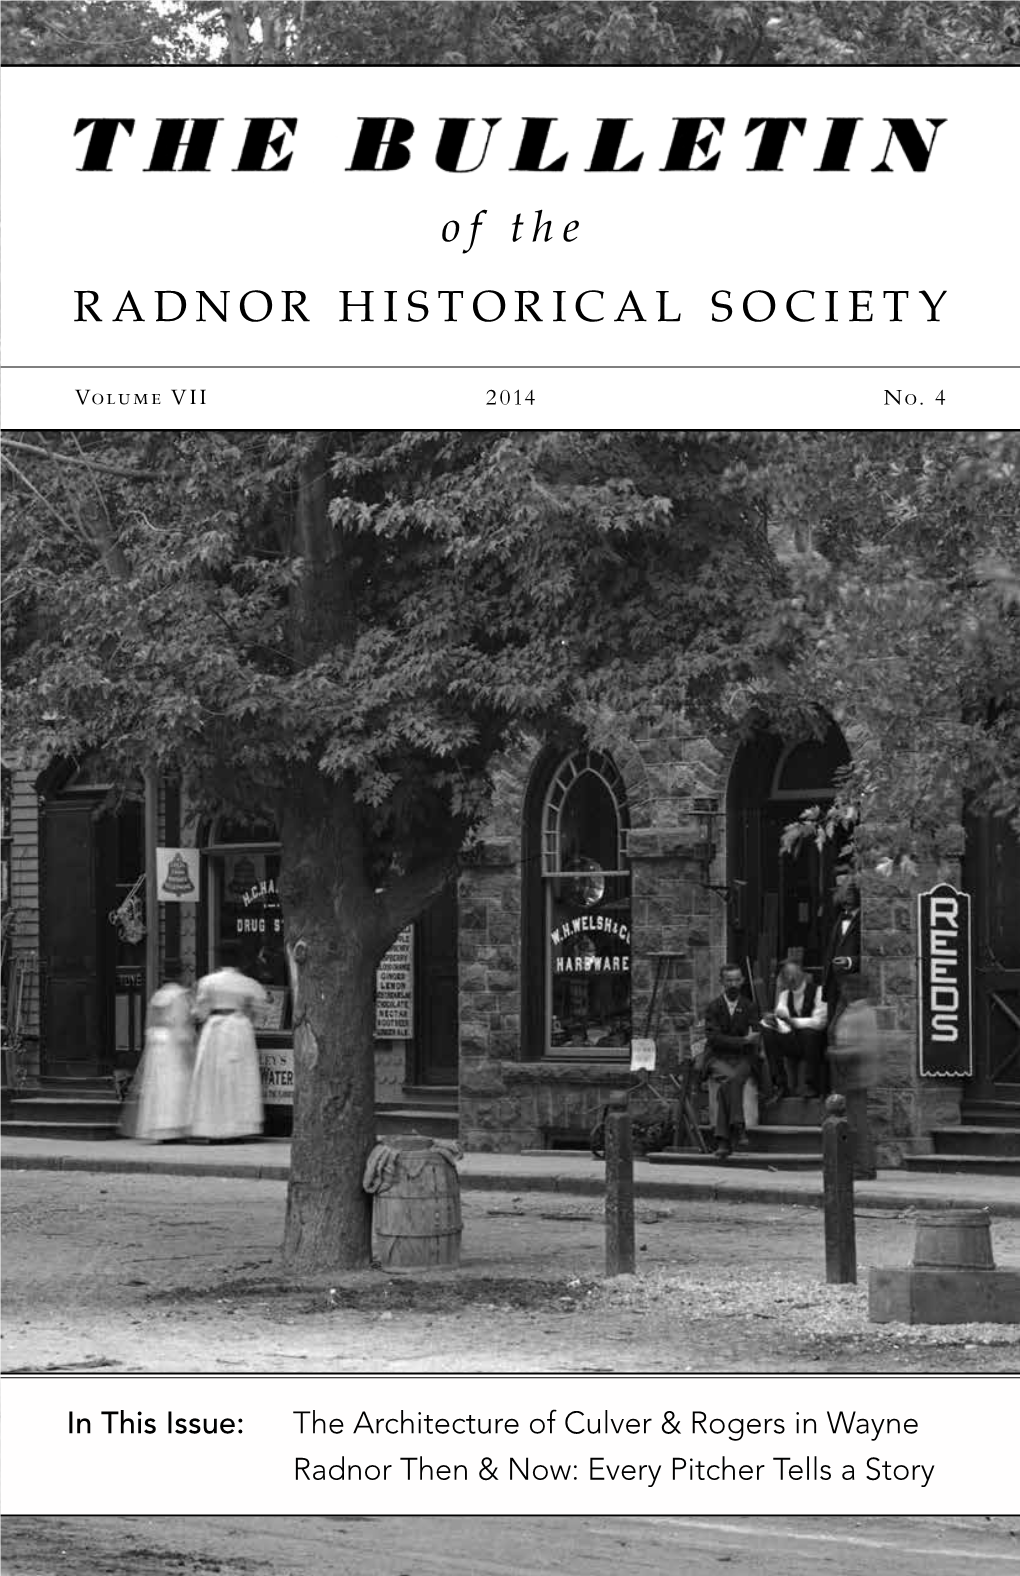 Of the RADNOR HISTORICAL SOCIETY